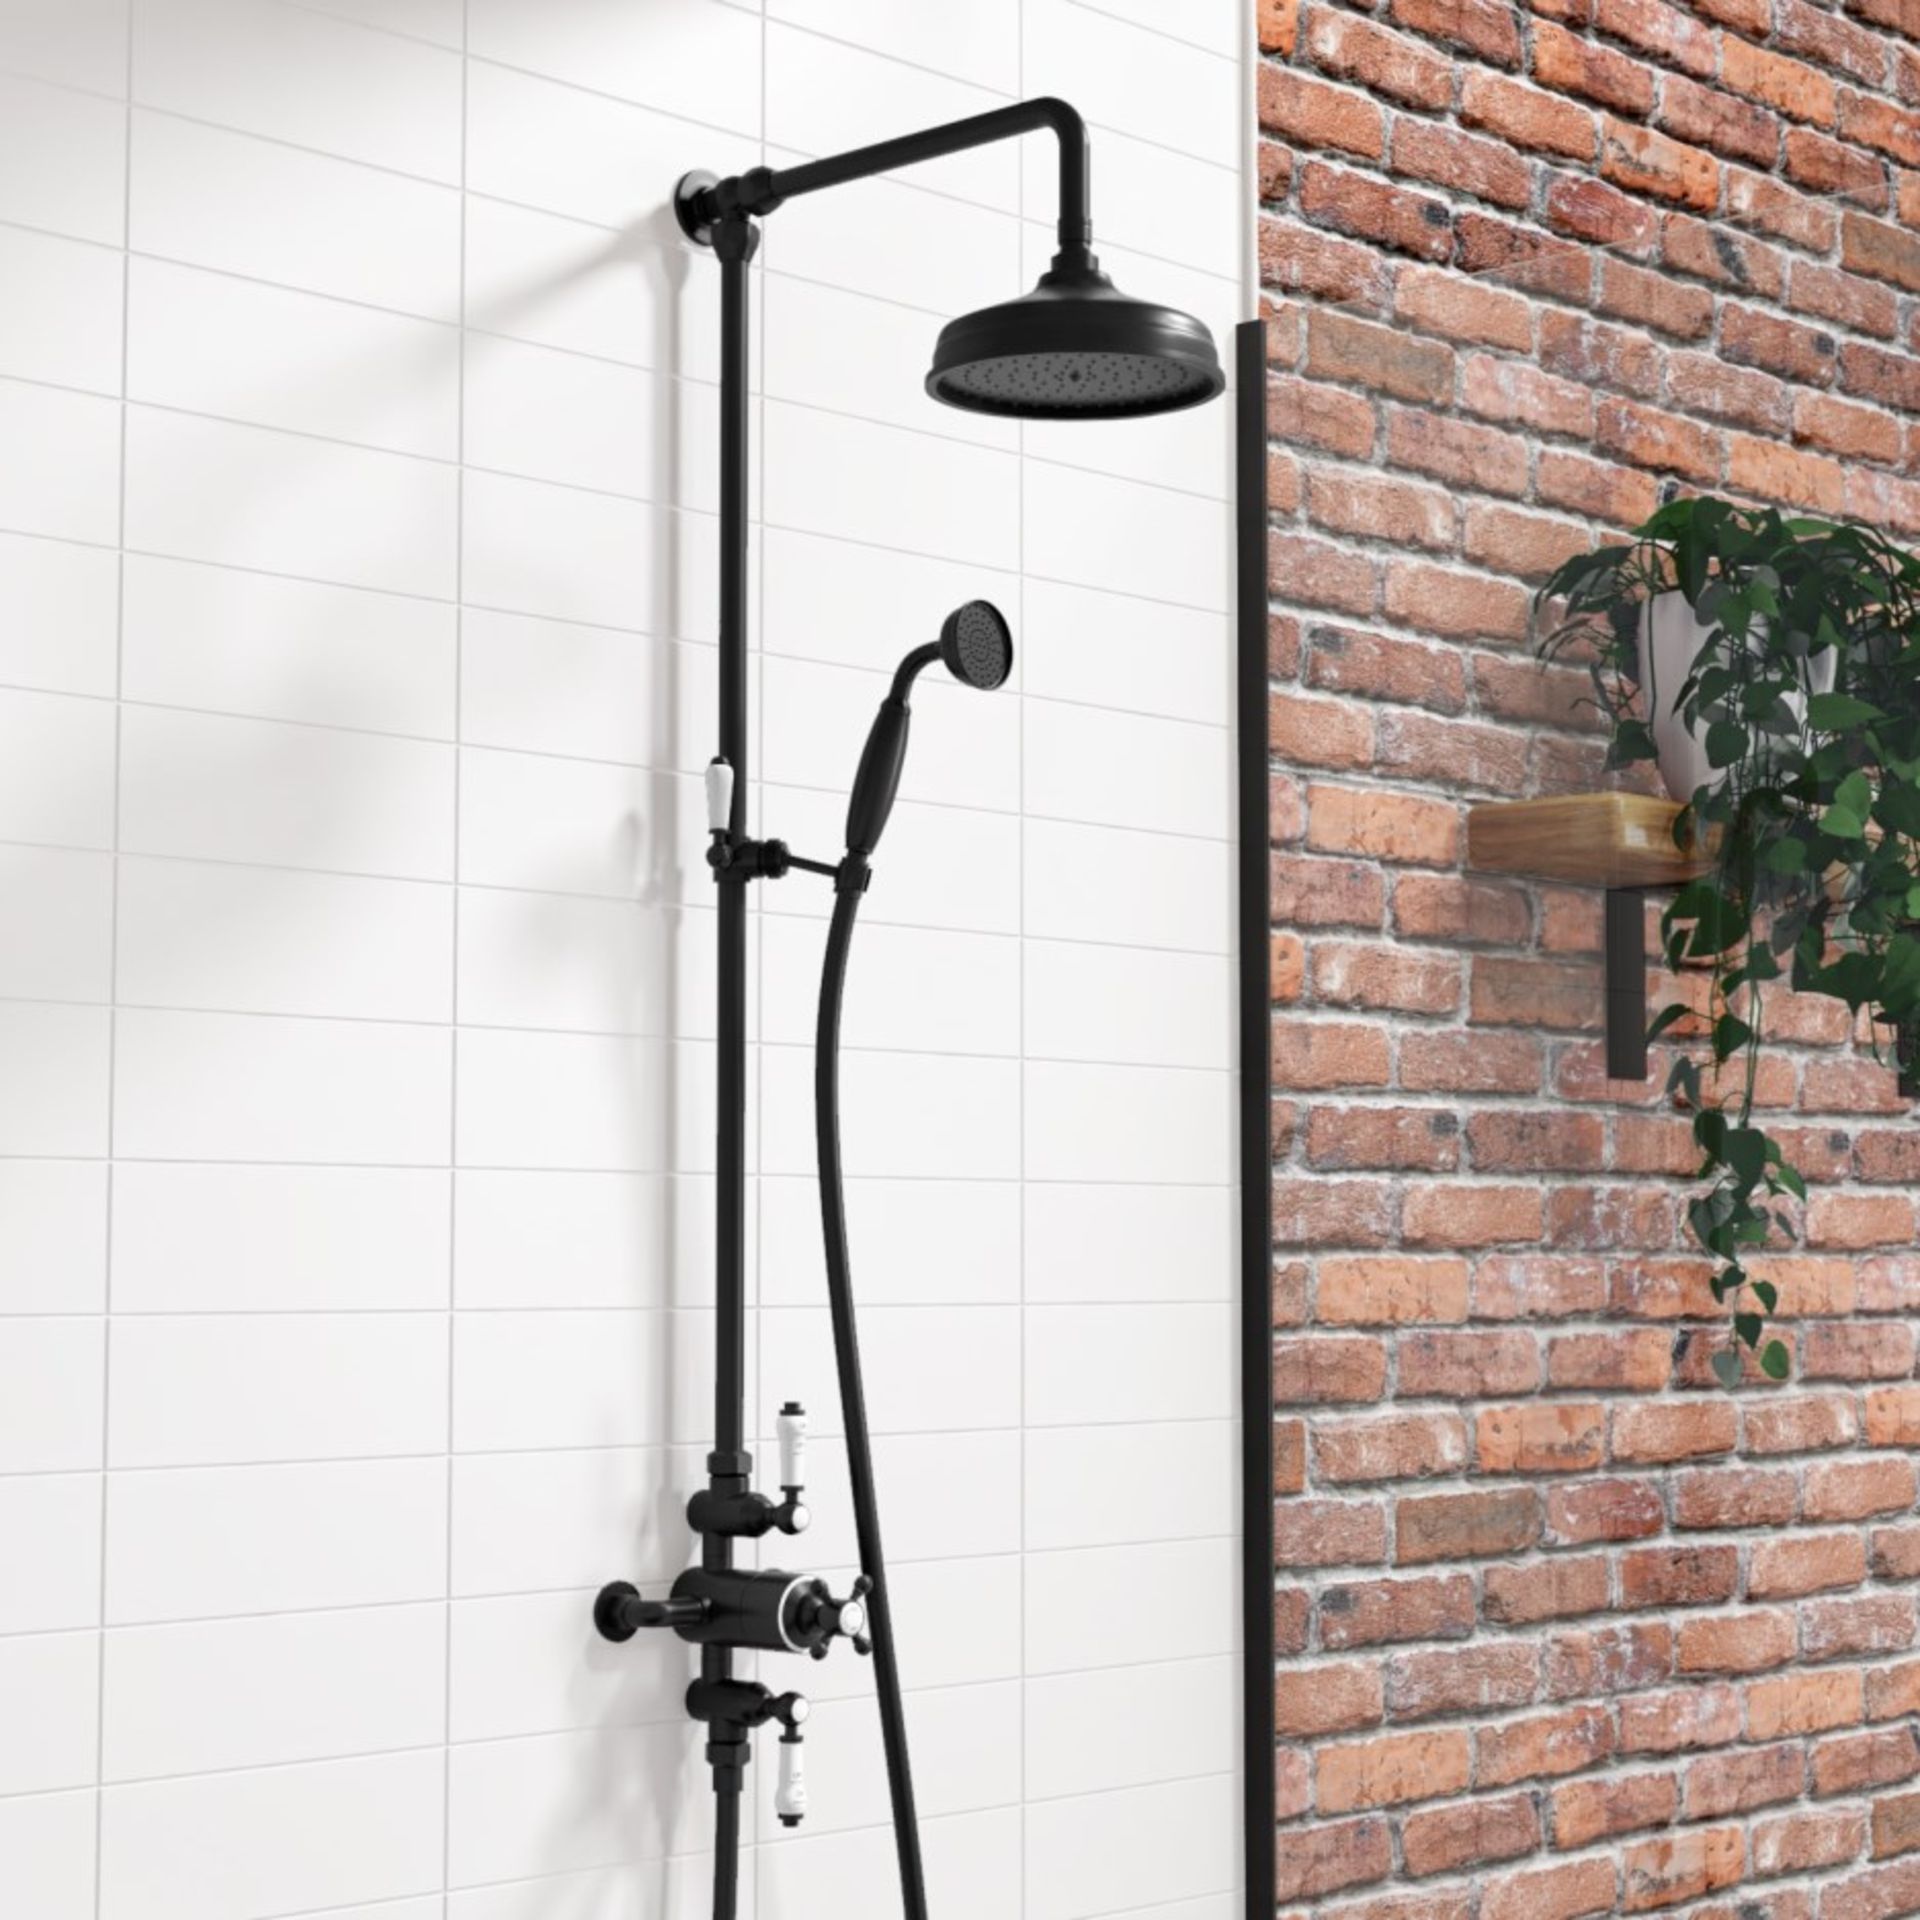 New & Boxed Black Traditional Thermostatic Exposed Mixer Shower Set. Sp6815B. 8" Head + Handse...